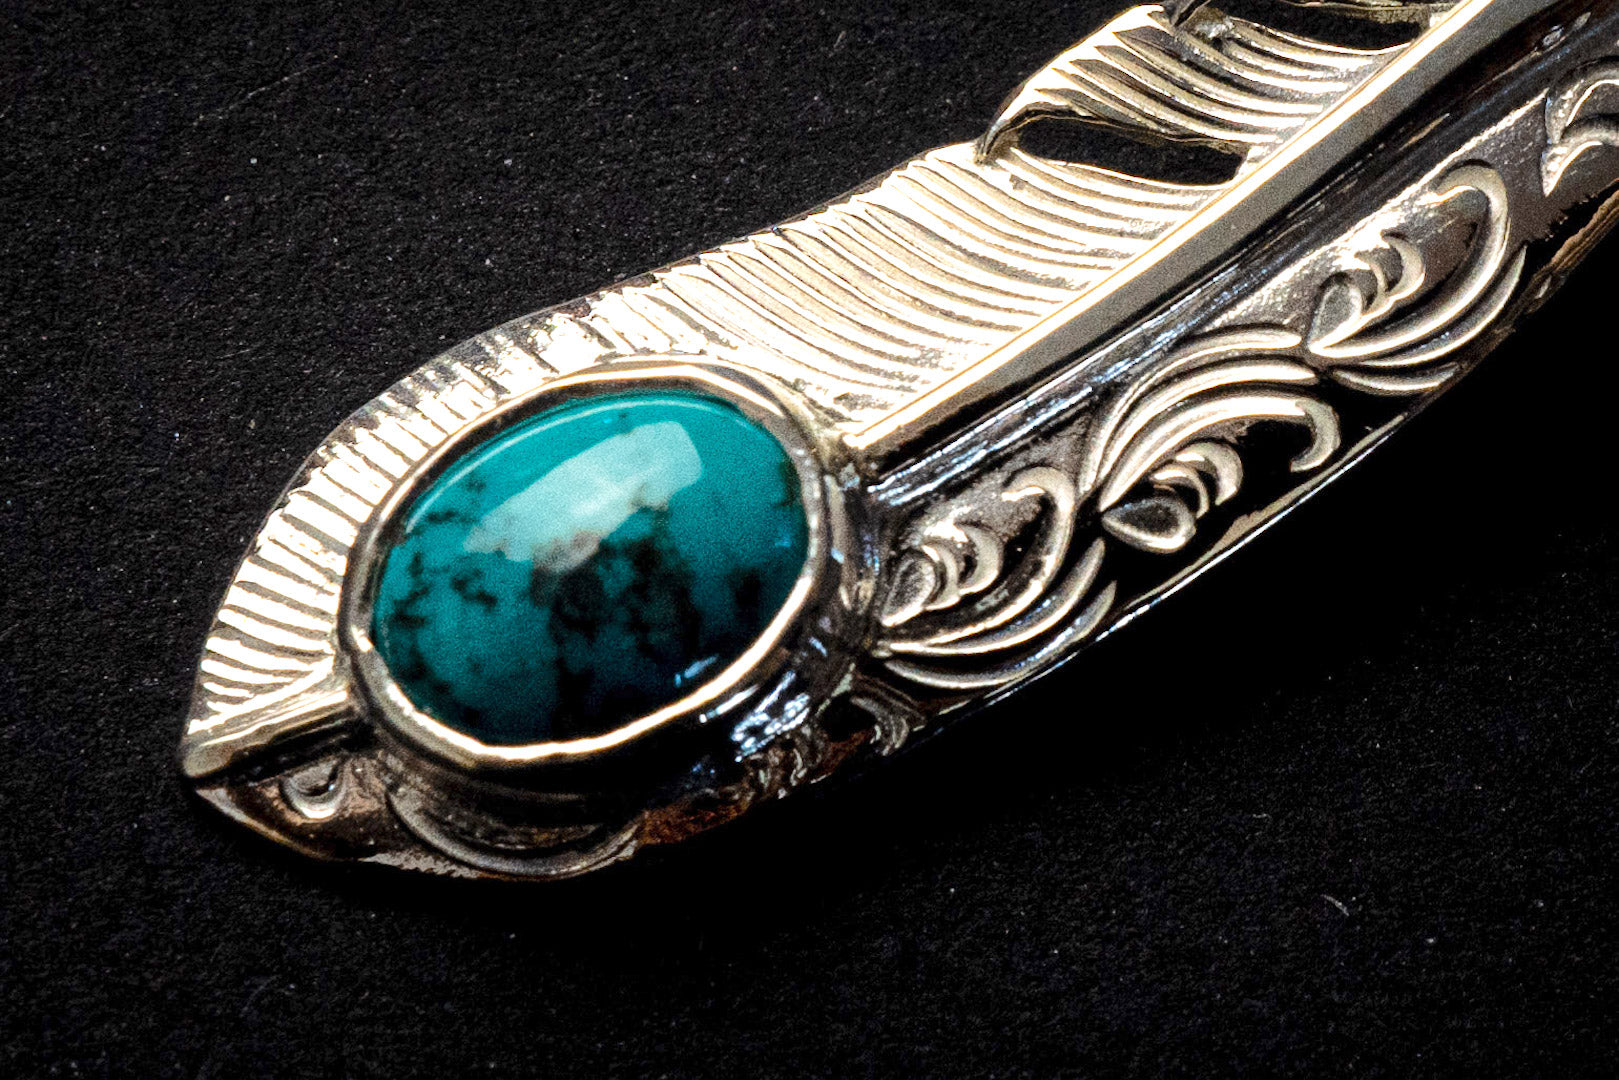 First Arrow's Small "Cloudy" Silver Pendant With Turquoise Limited Edition (CR-004)